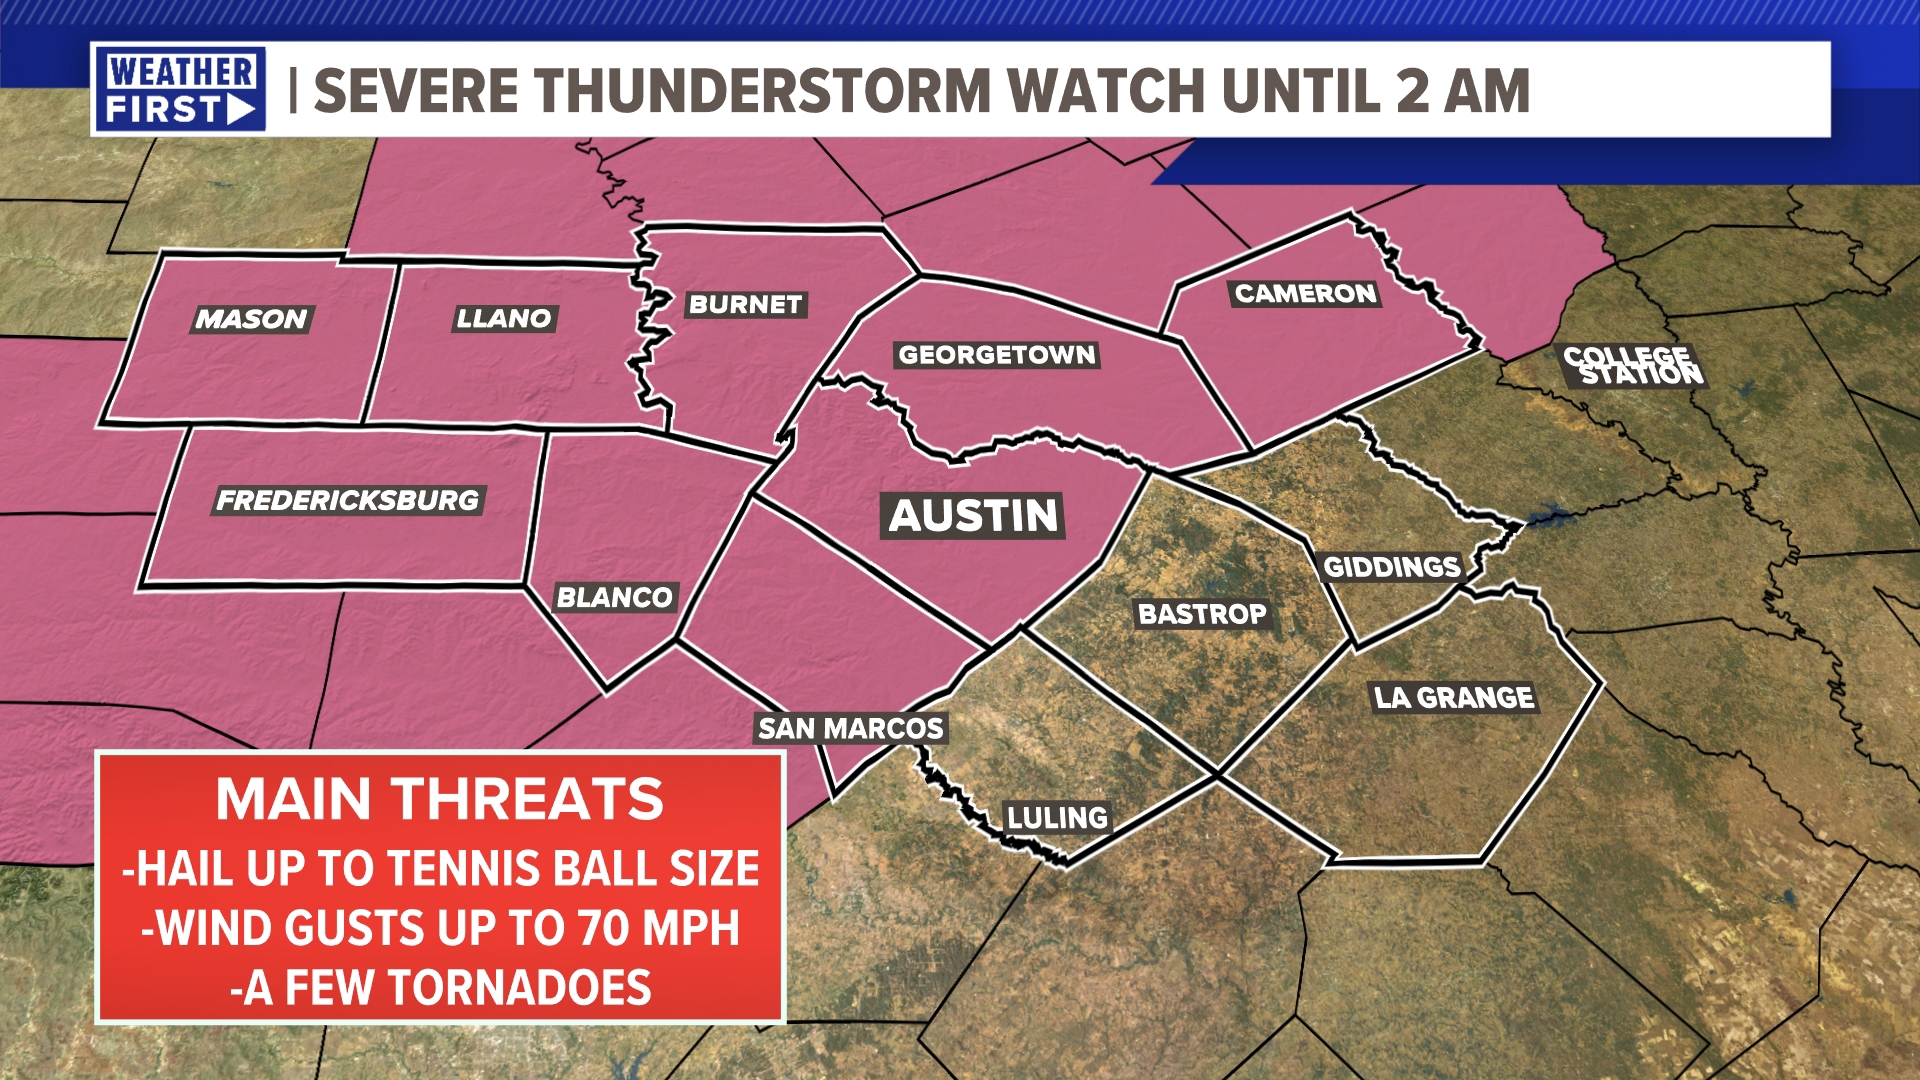 A Severe Thunderstorm Watch is in effect until 2 a.m. as storms approach Central Texas.